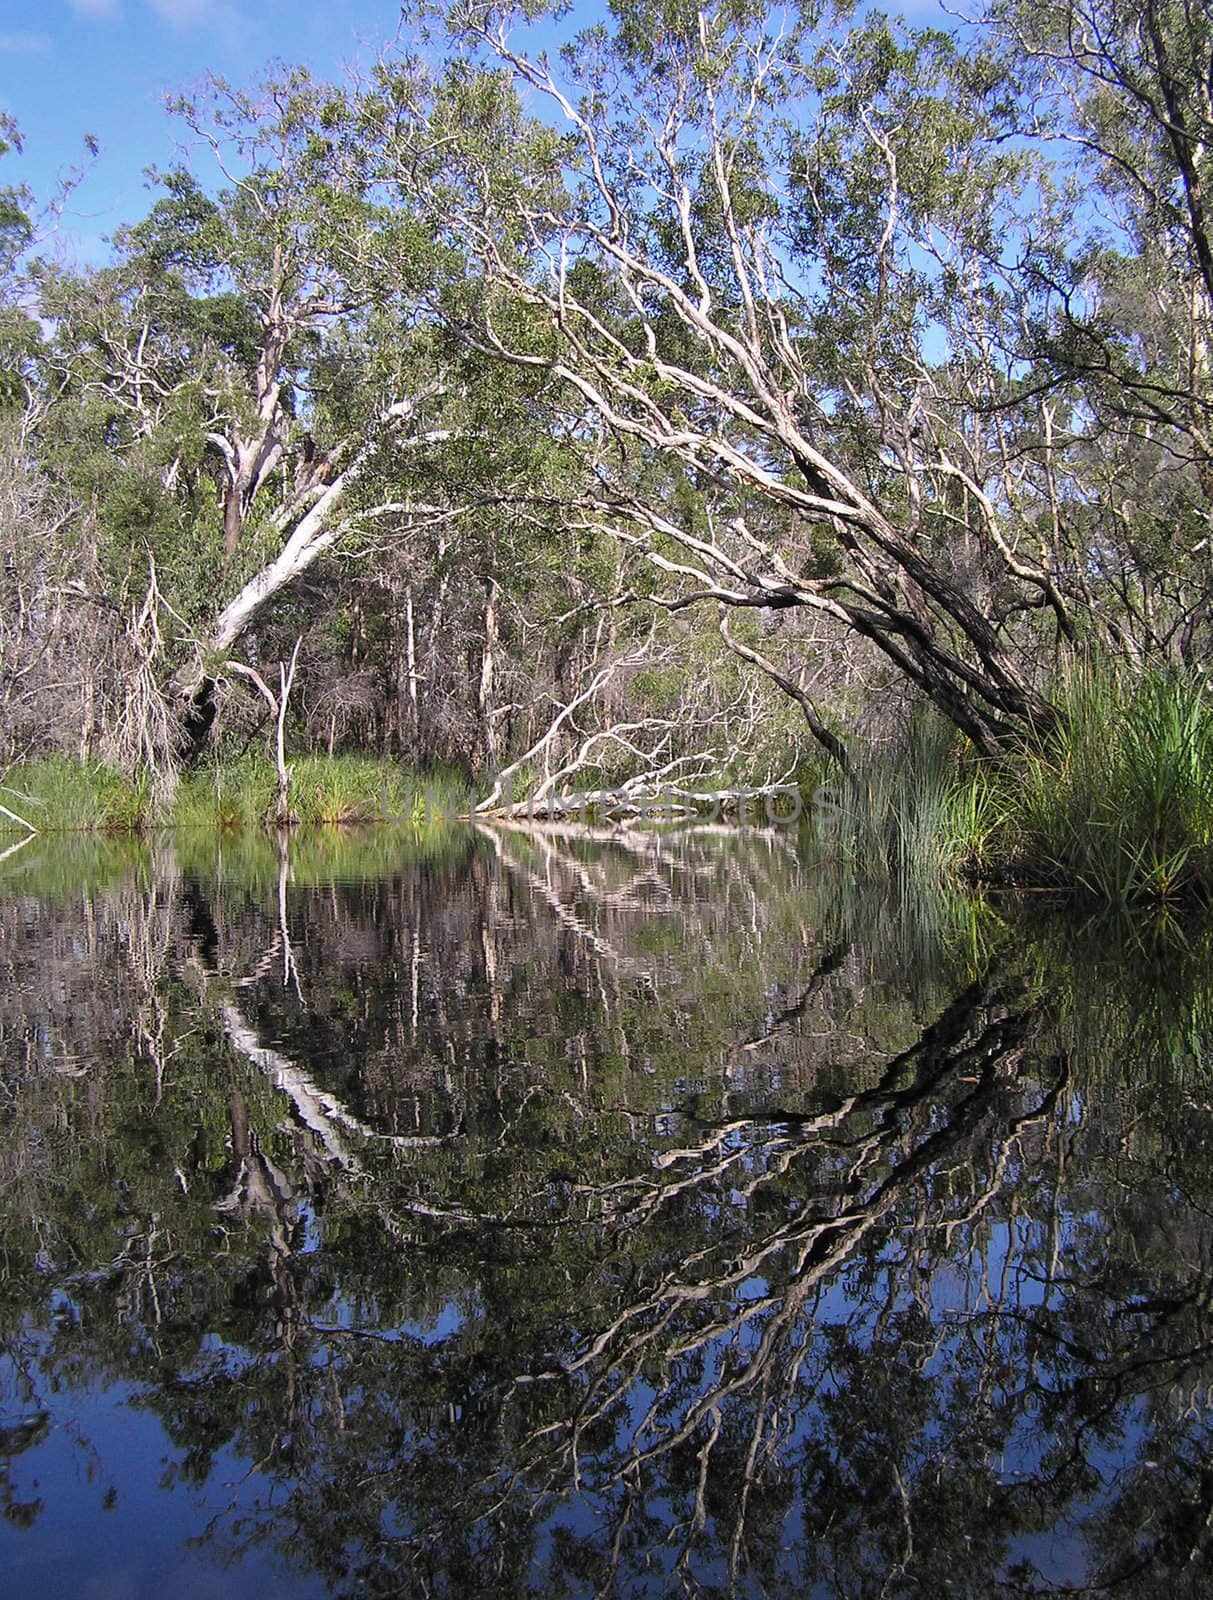 Overhanging trees forming a beautiful portal on the river in Australian eucalyptus forest.